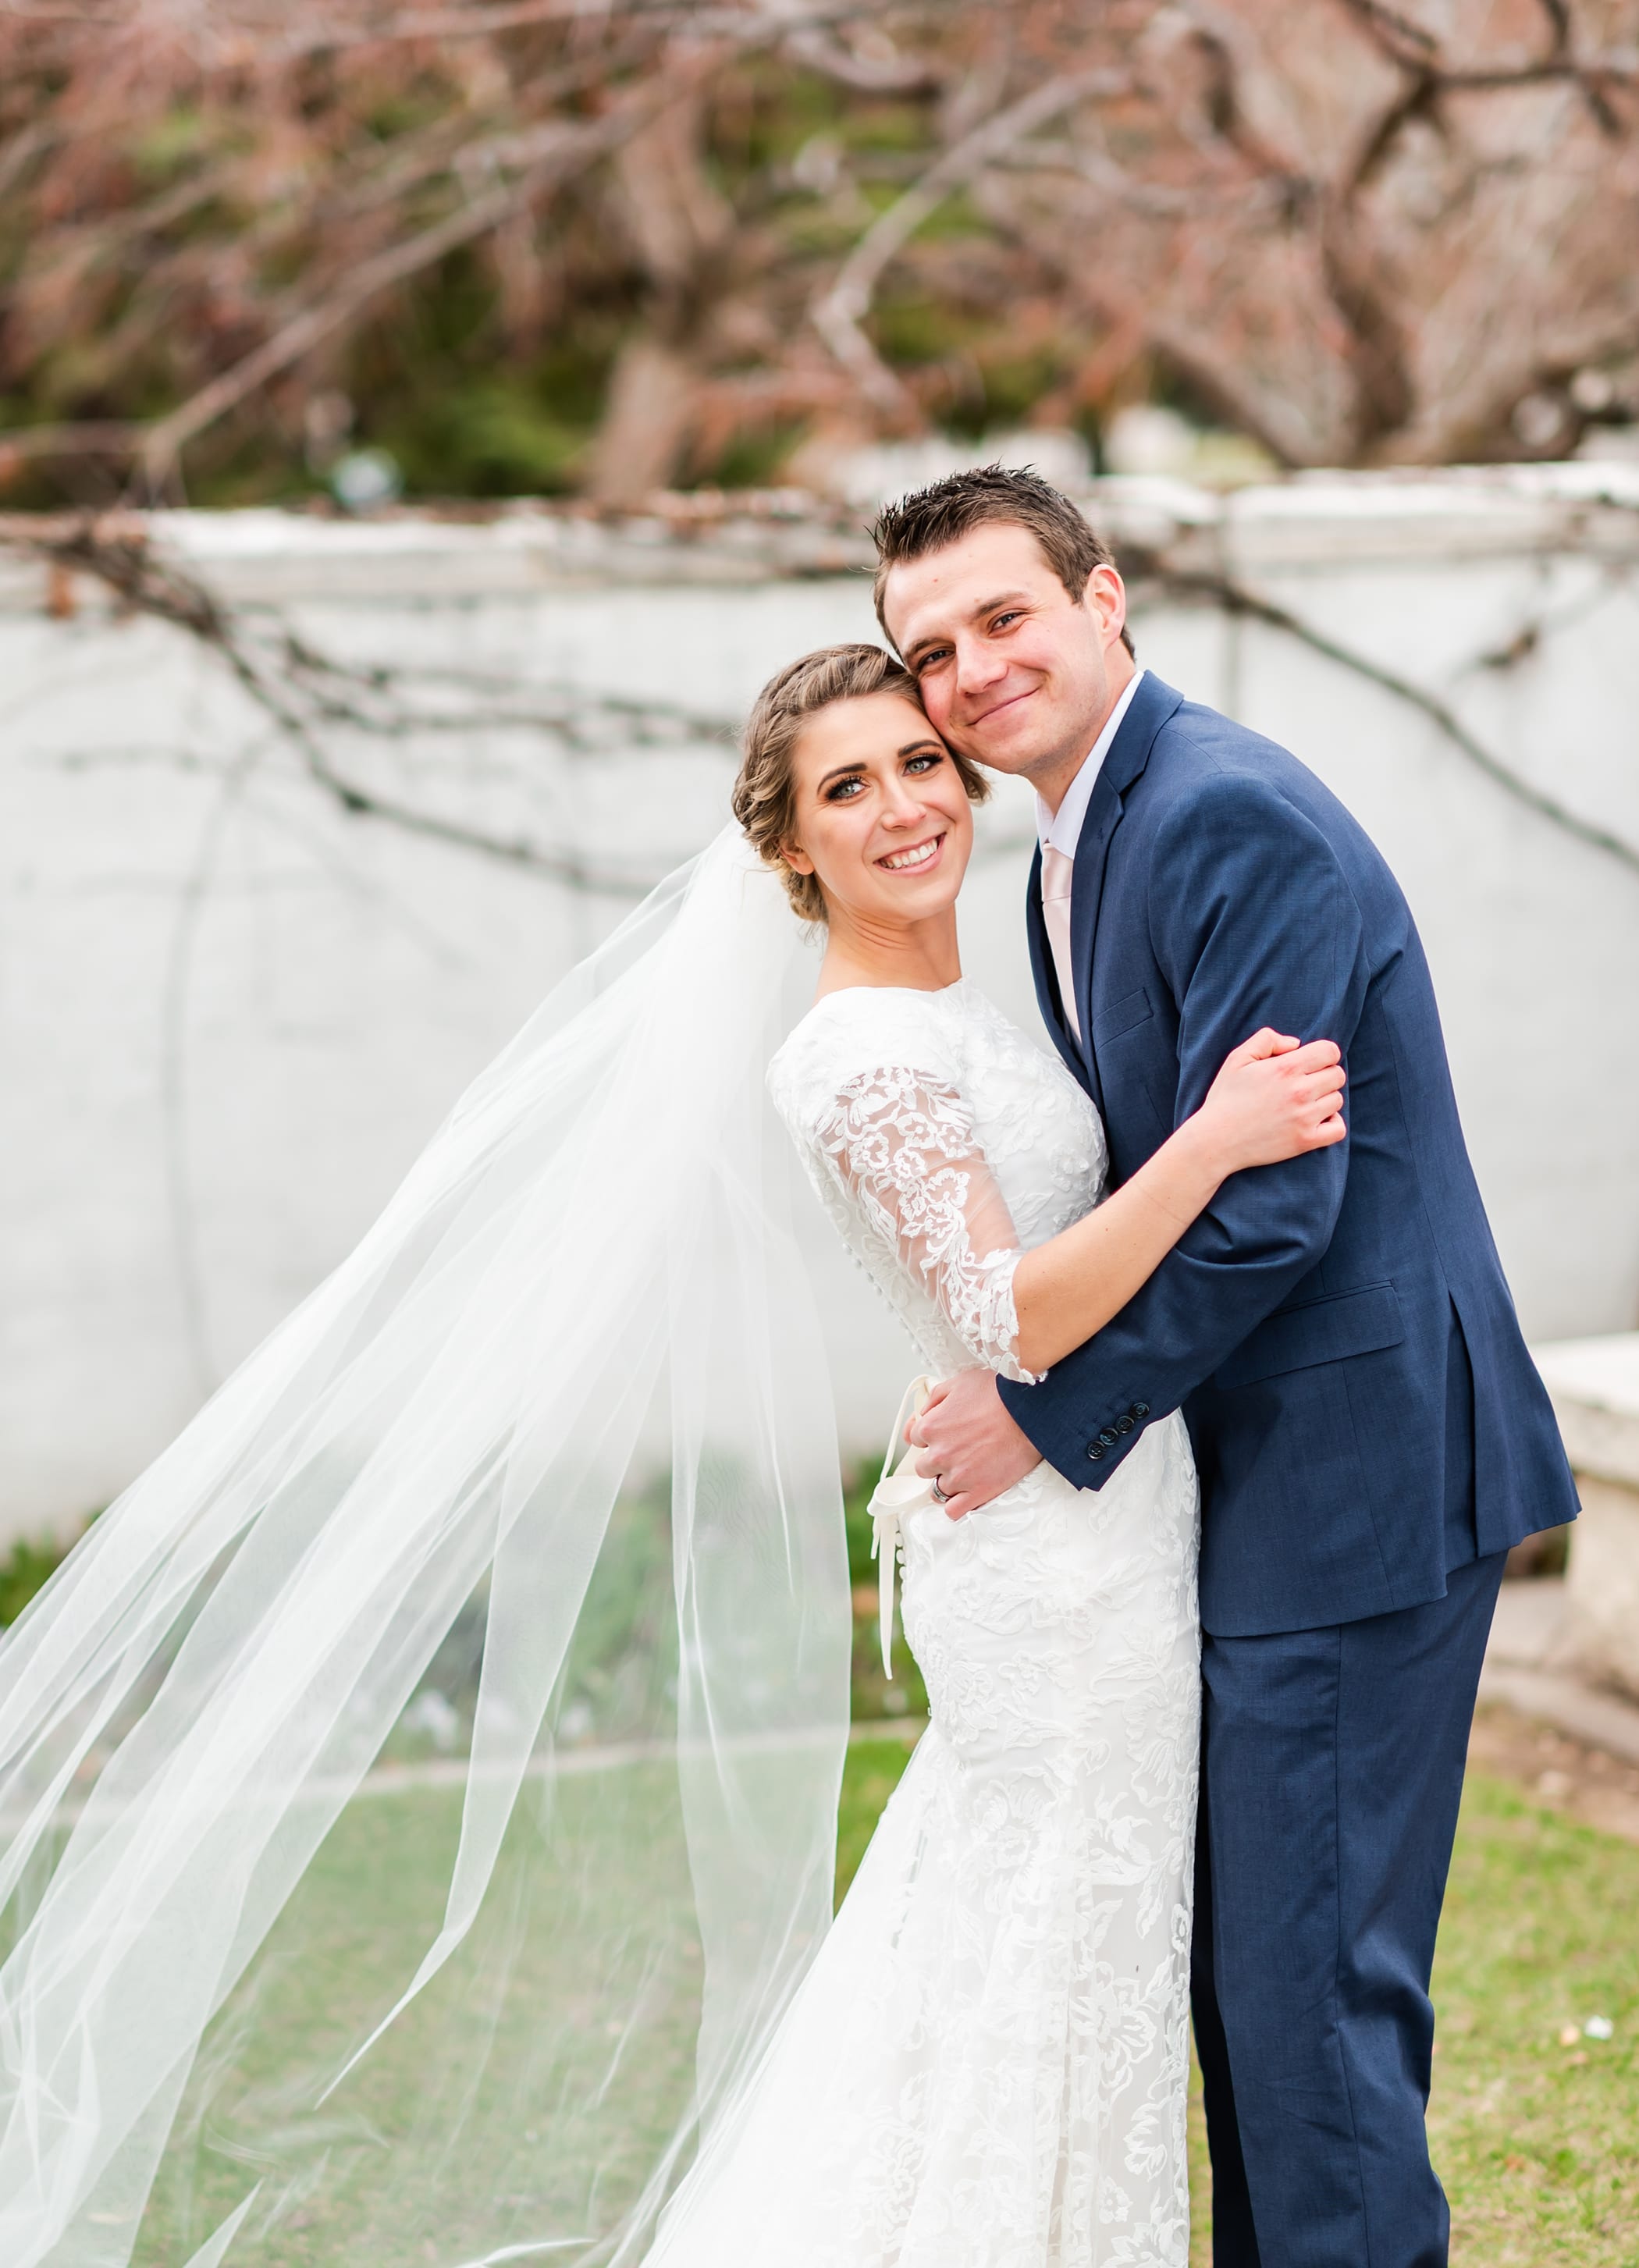 Classic wedding portrait with lace three quarter length sleeves and long veil with navy suit